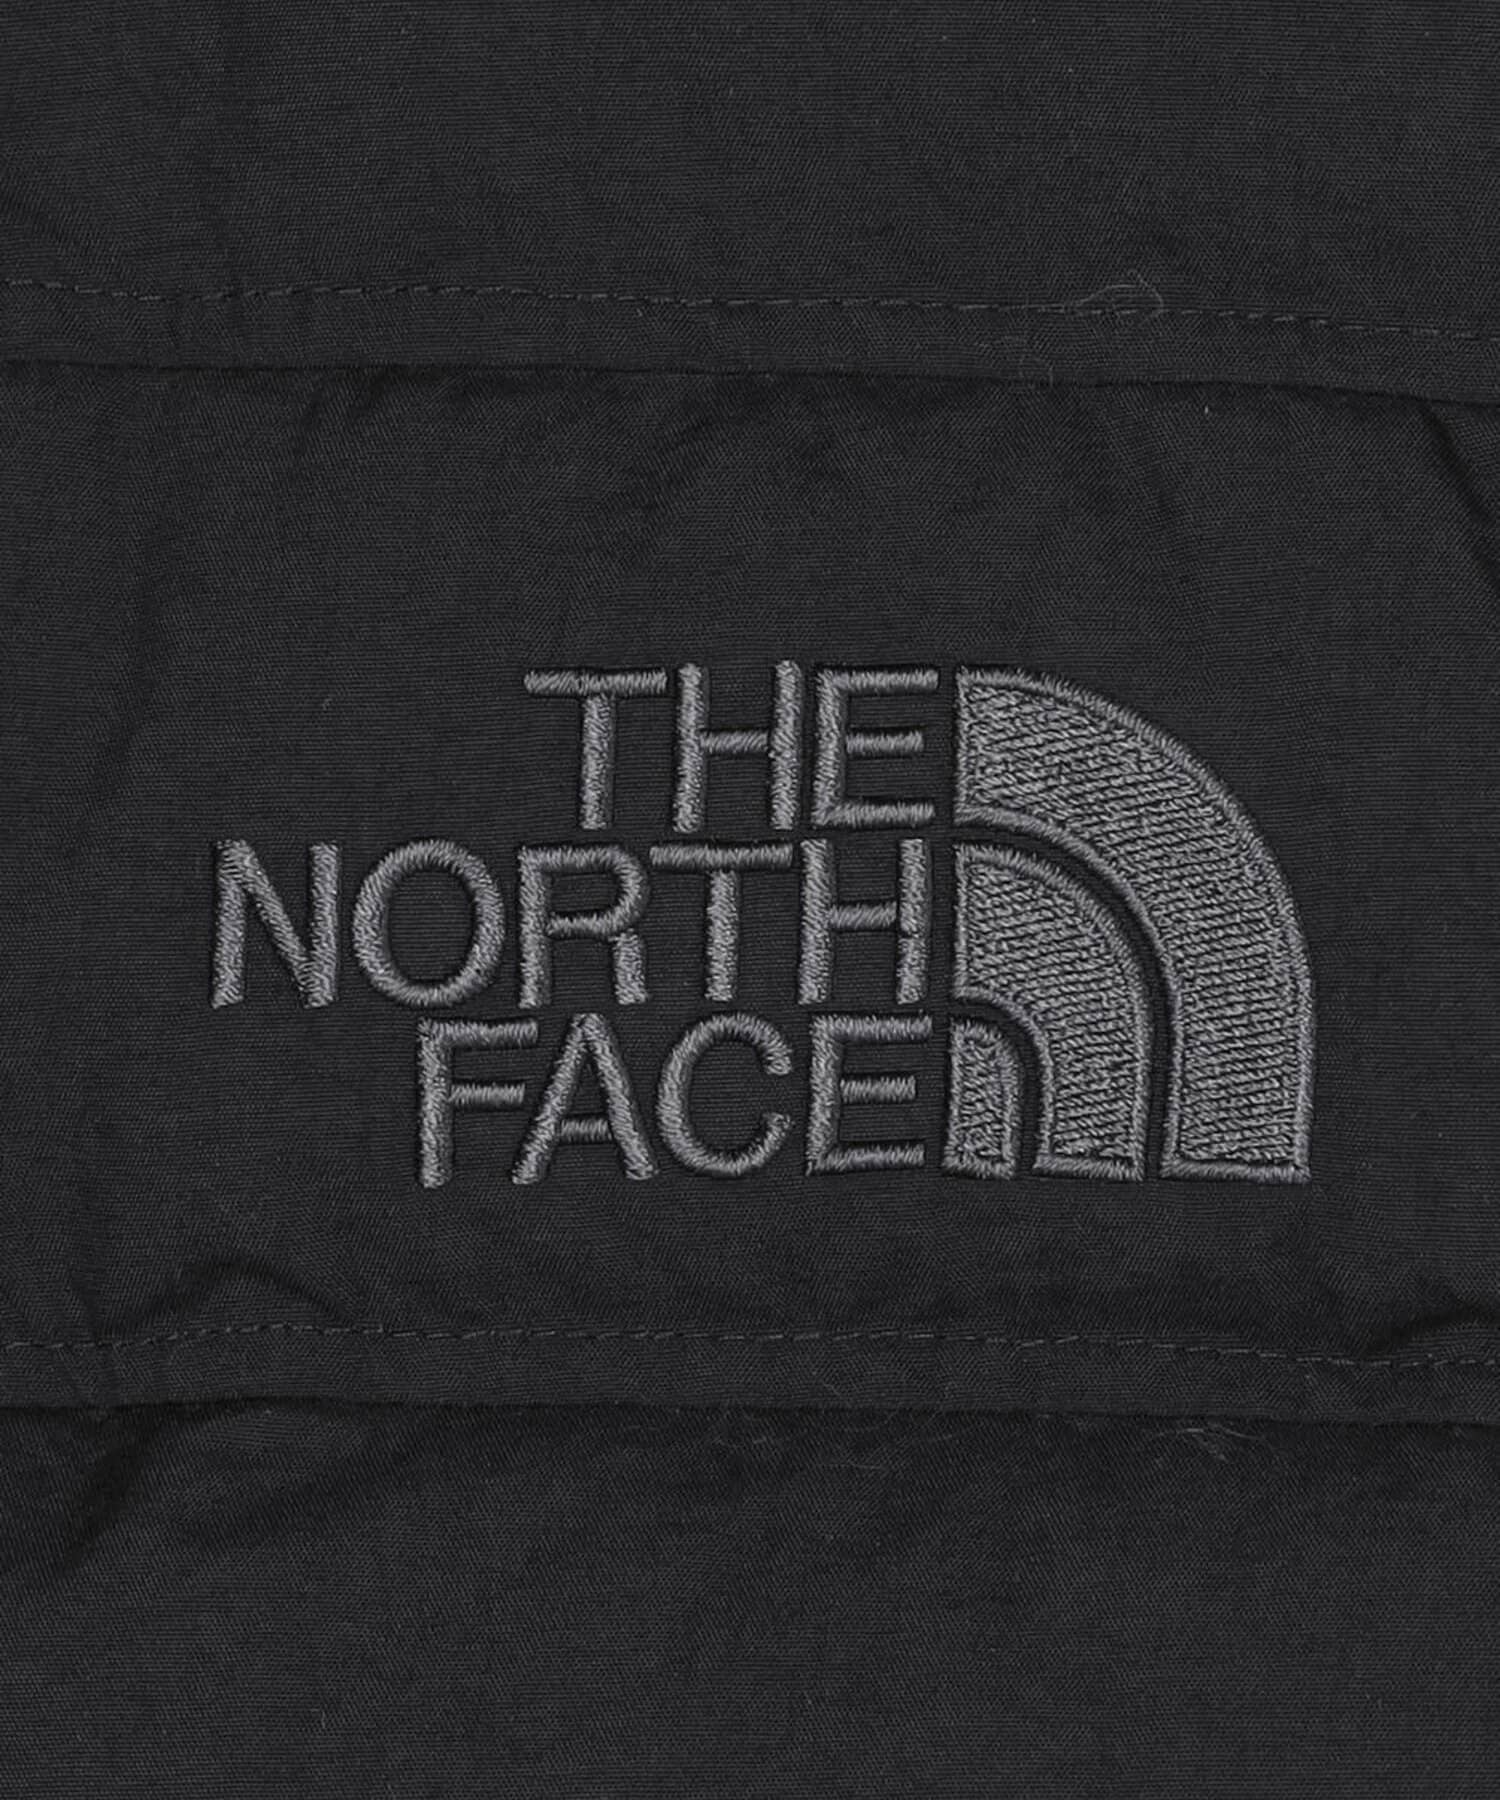 WHO’S WHO gallery(フーズフーギャラリー) THE NORTH FACE_Alteration Baffs Jacket